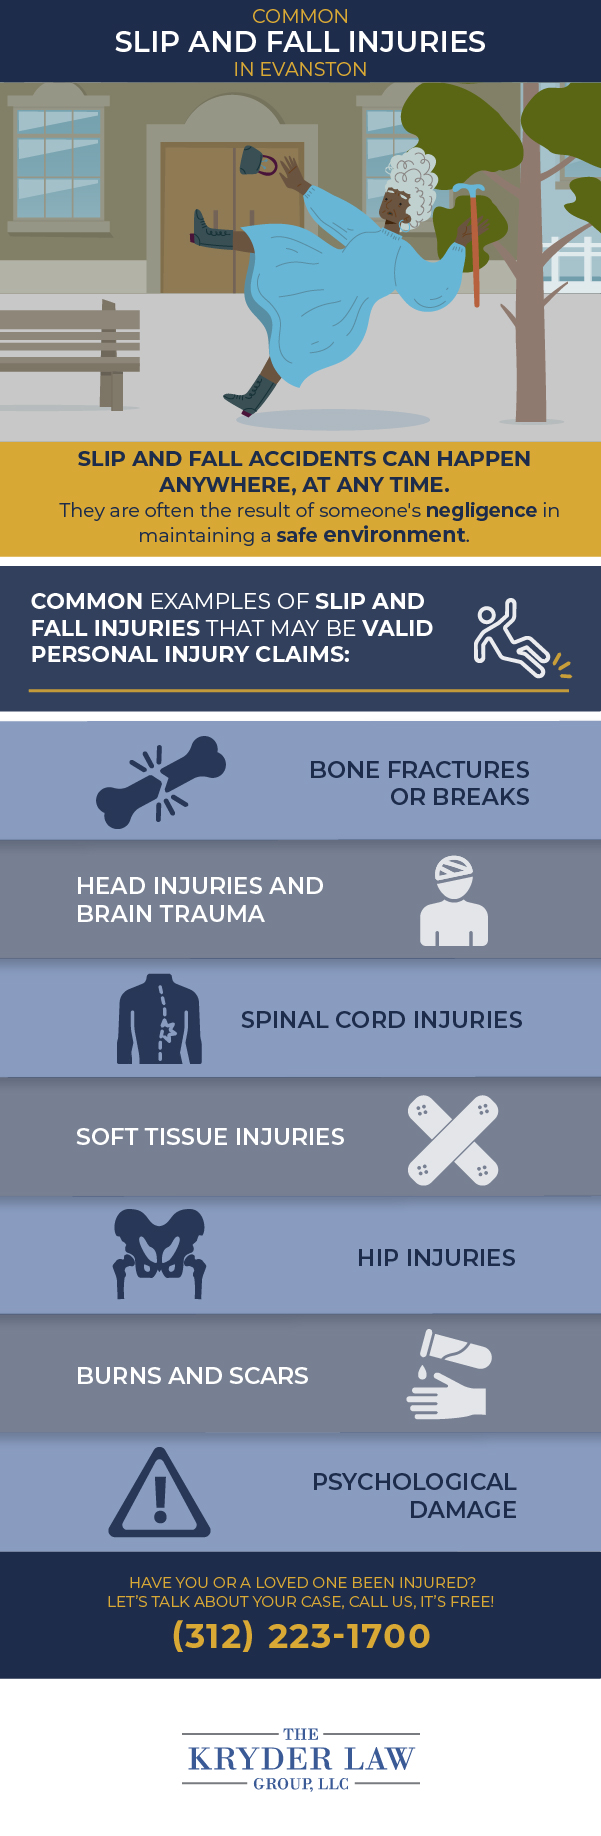 The Benefits of Hiring an Evanston Slip and Fall Injury Lawyer Infographic